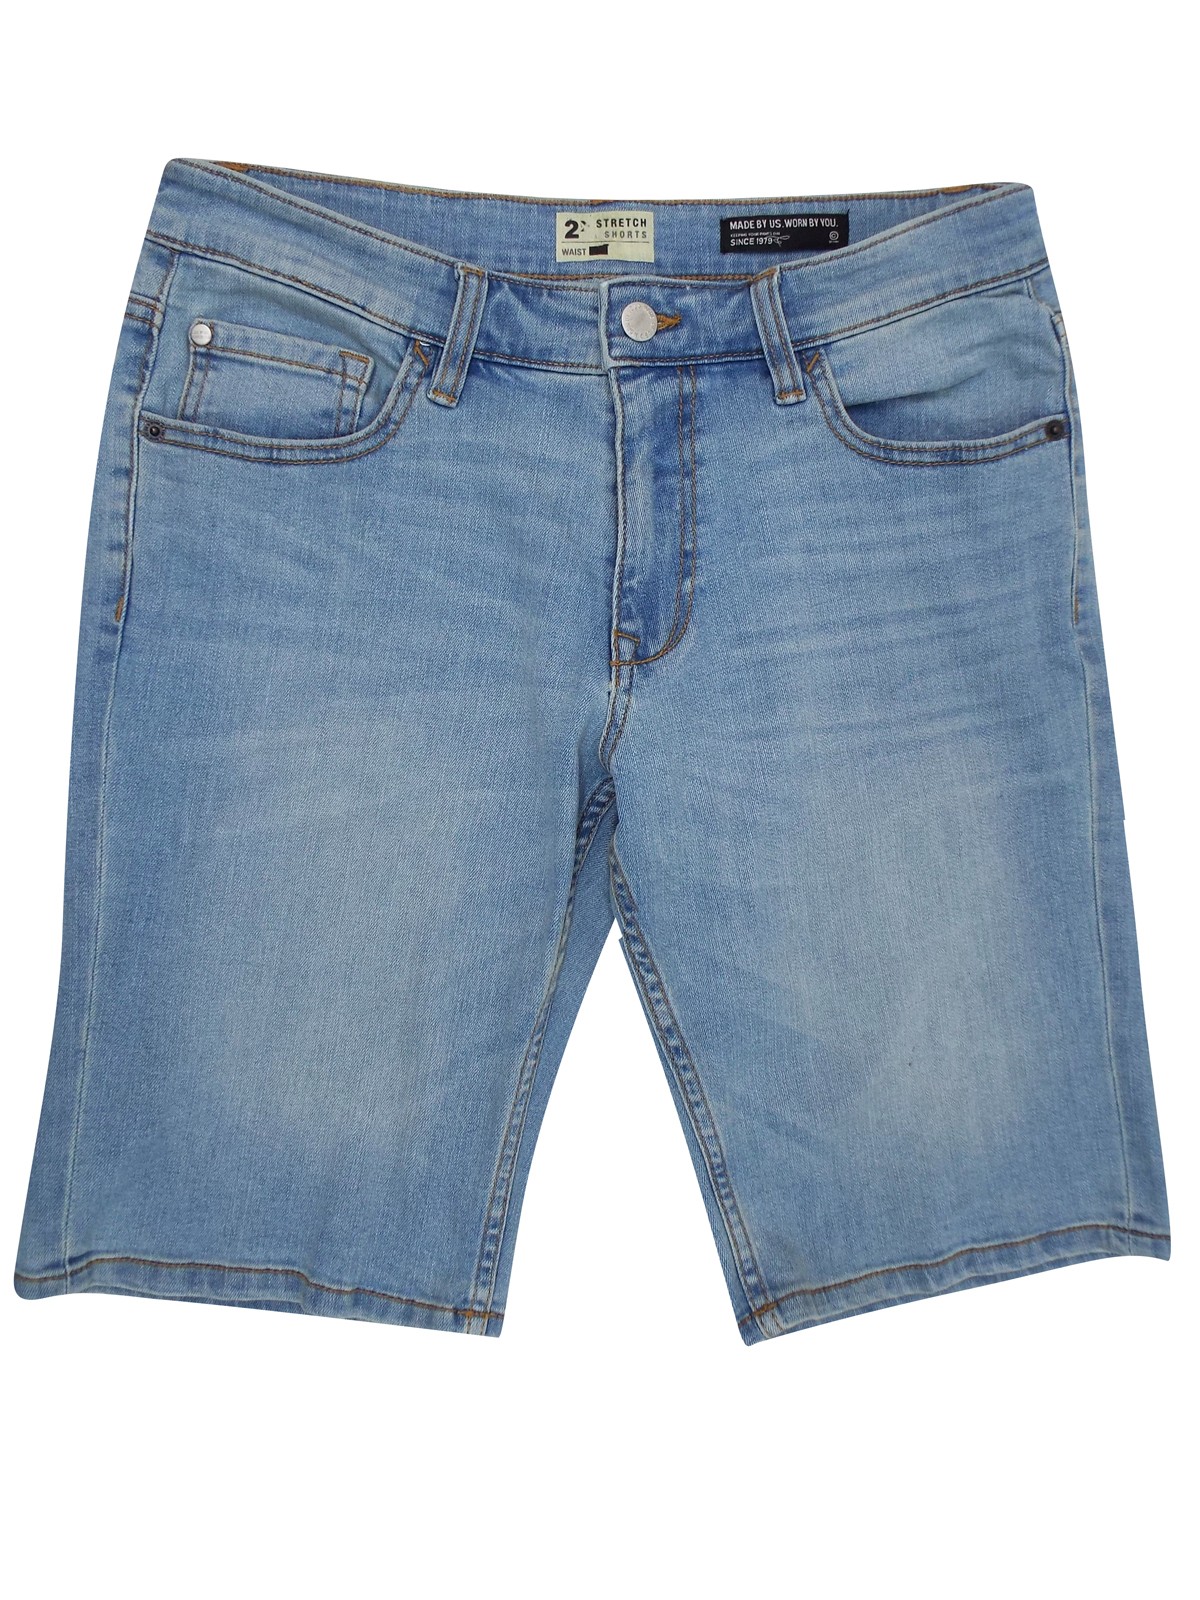 Made by US - - Made by US LIGHT-DENIM Cotton Rich 5-Pocket Denim Shorts ...